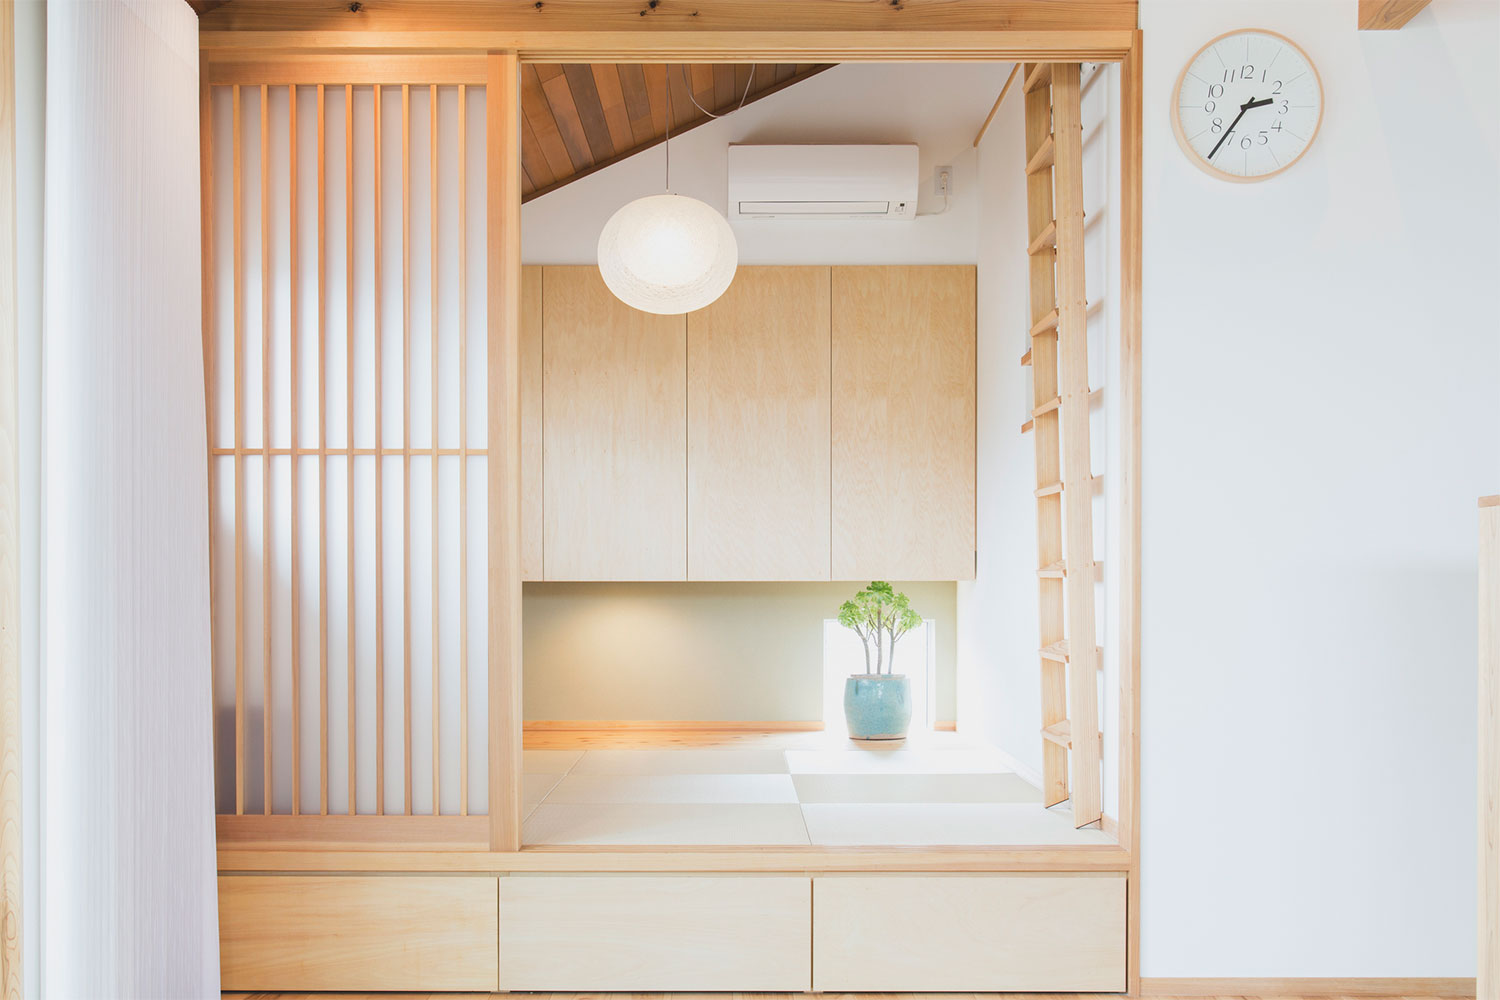 How to integrate Japanese decoration into your home?